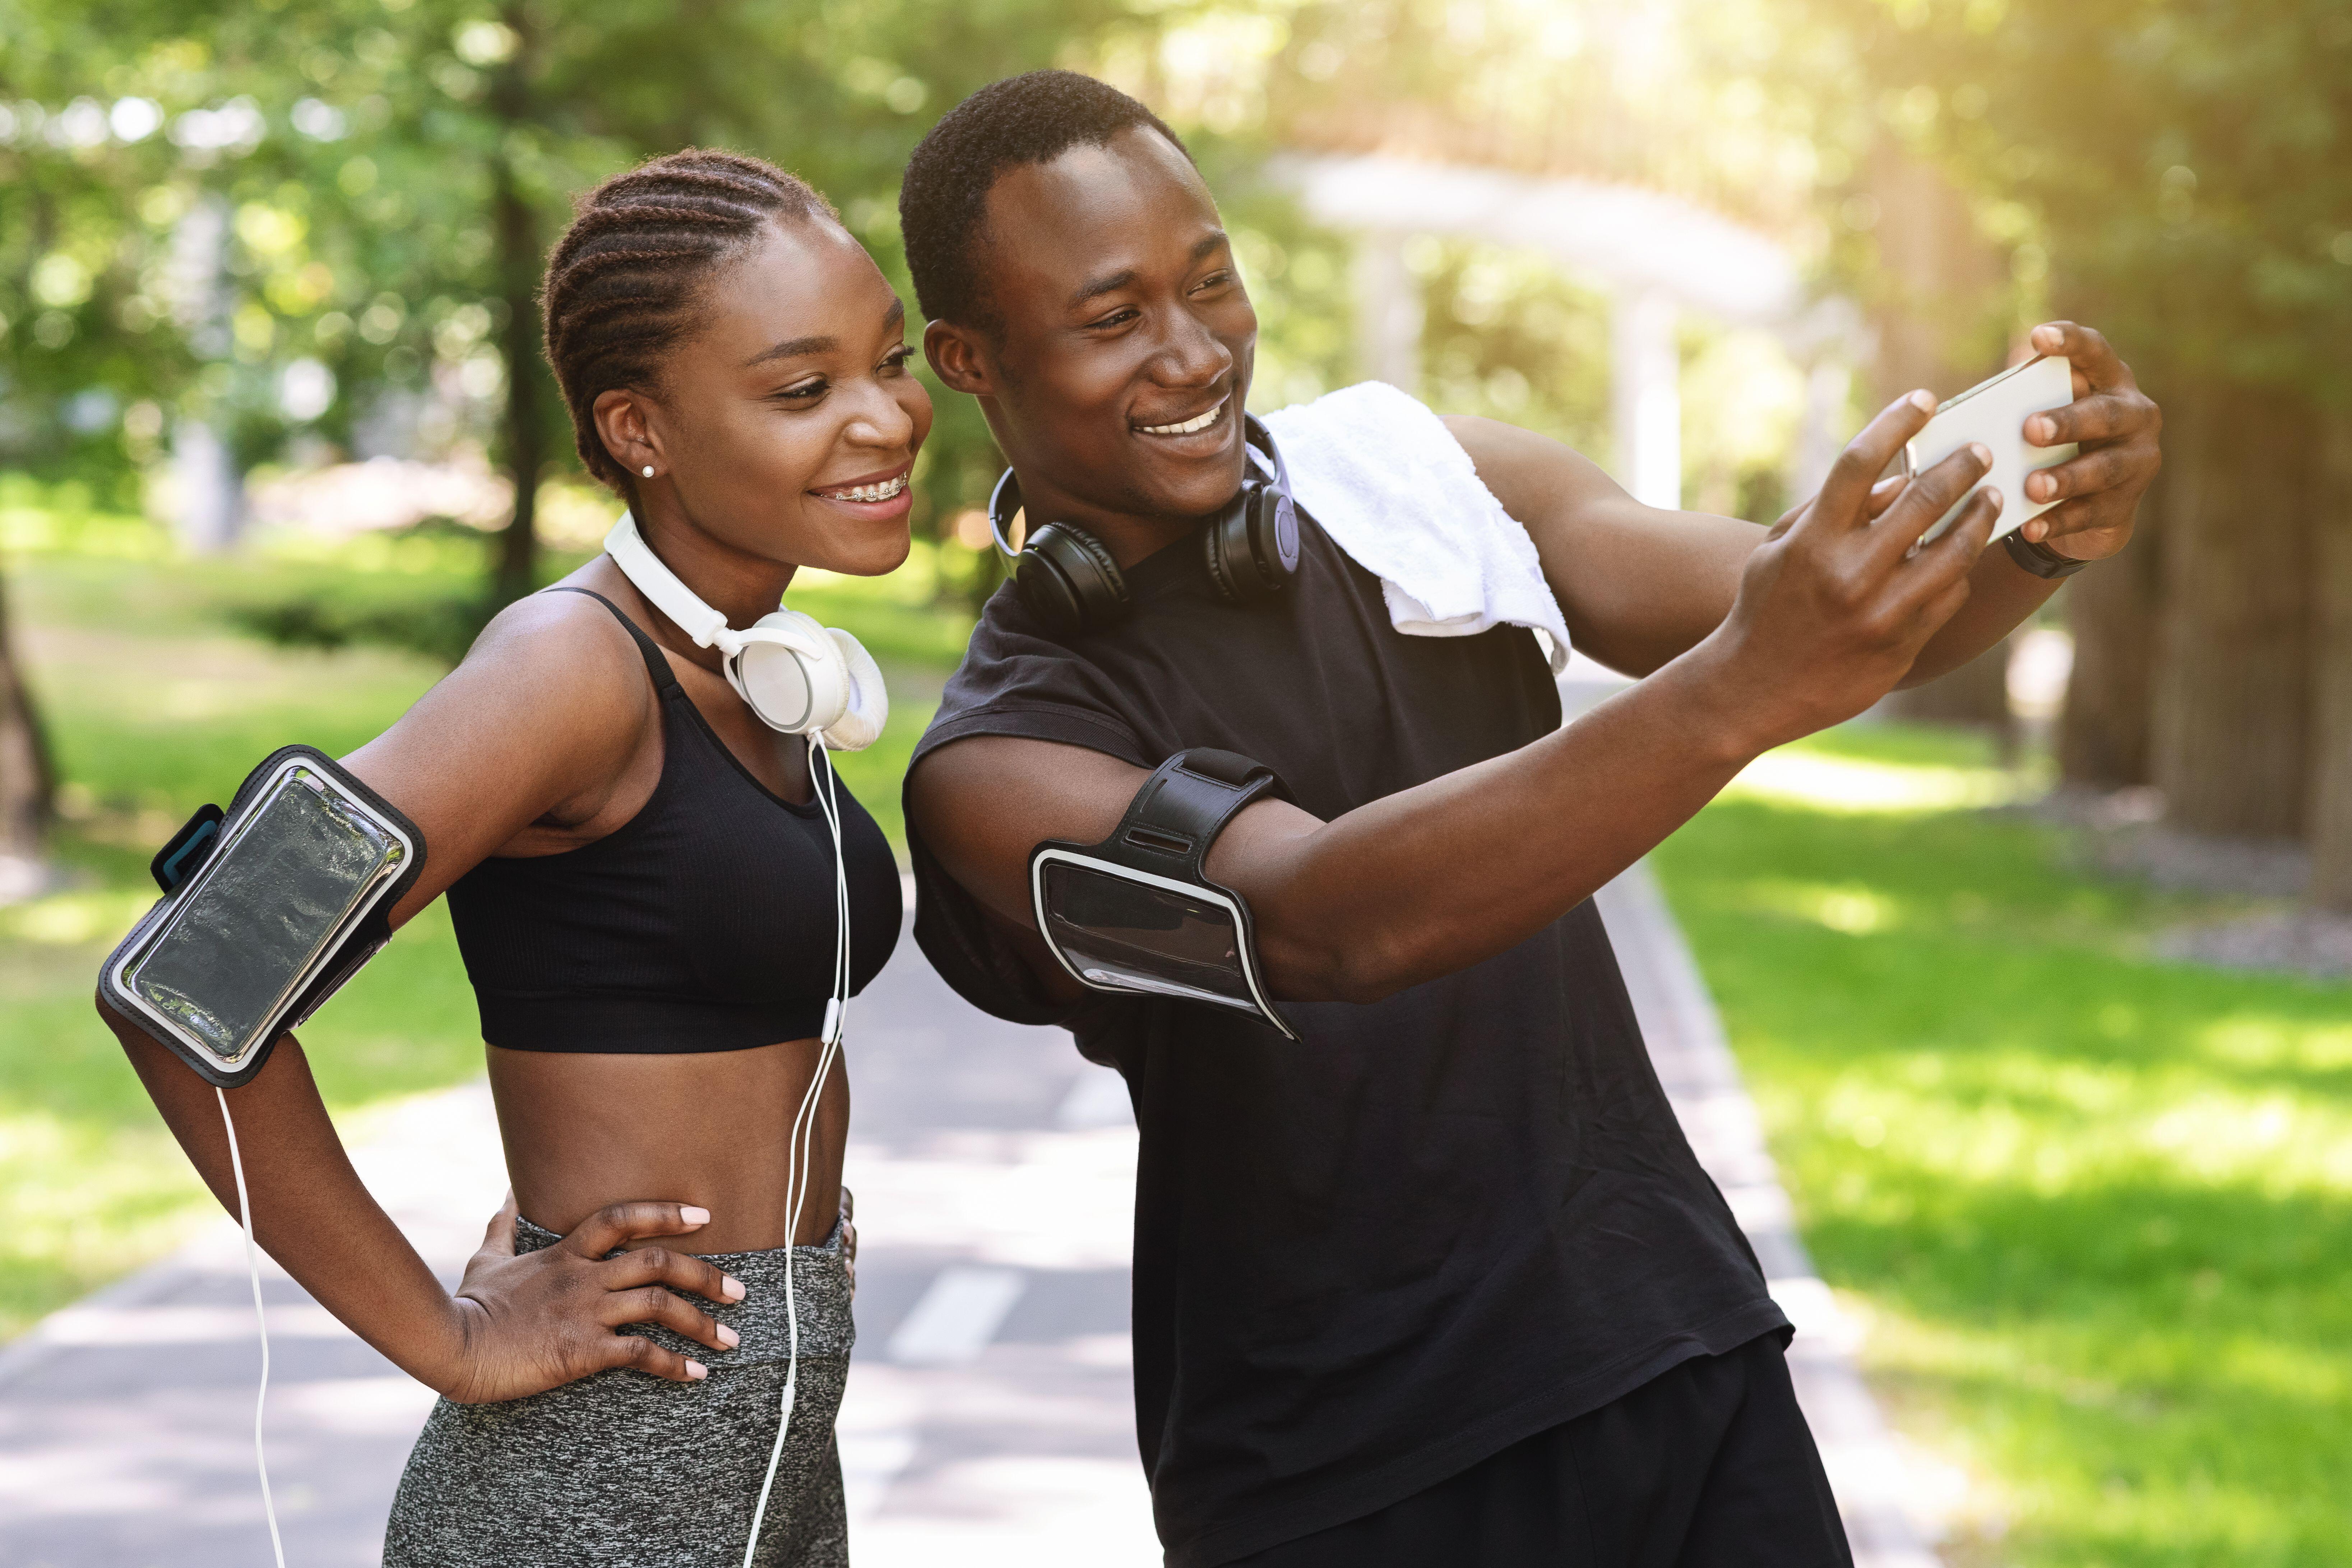 A man and woman out in running gear, taking a selfie in the sun